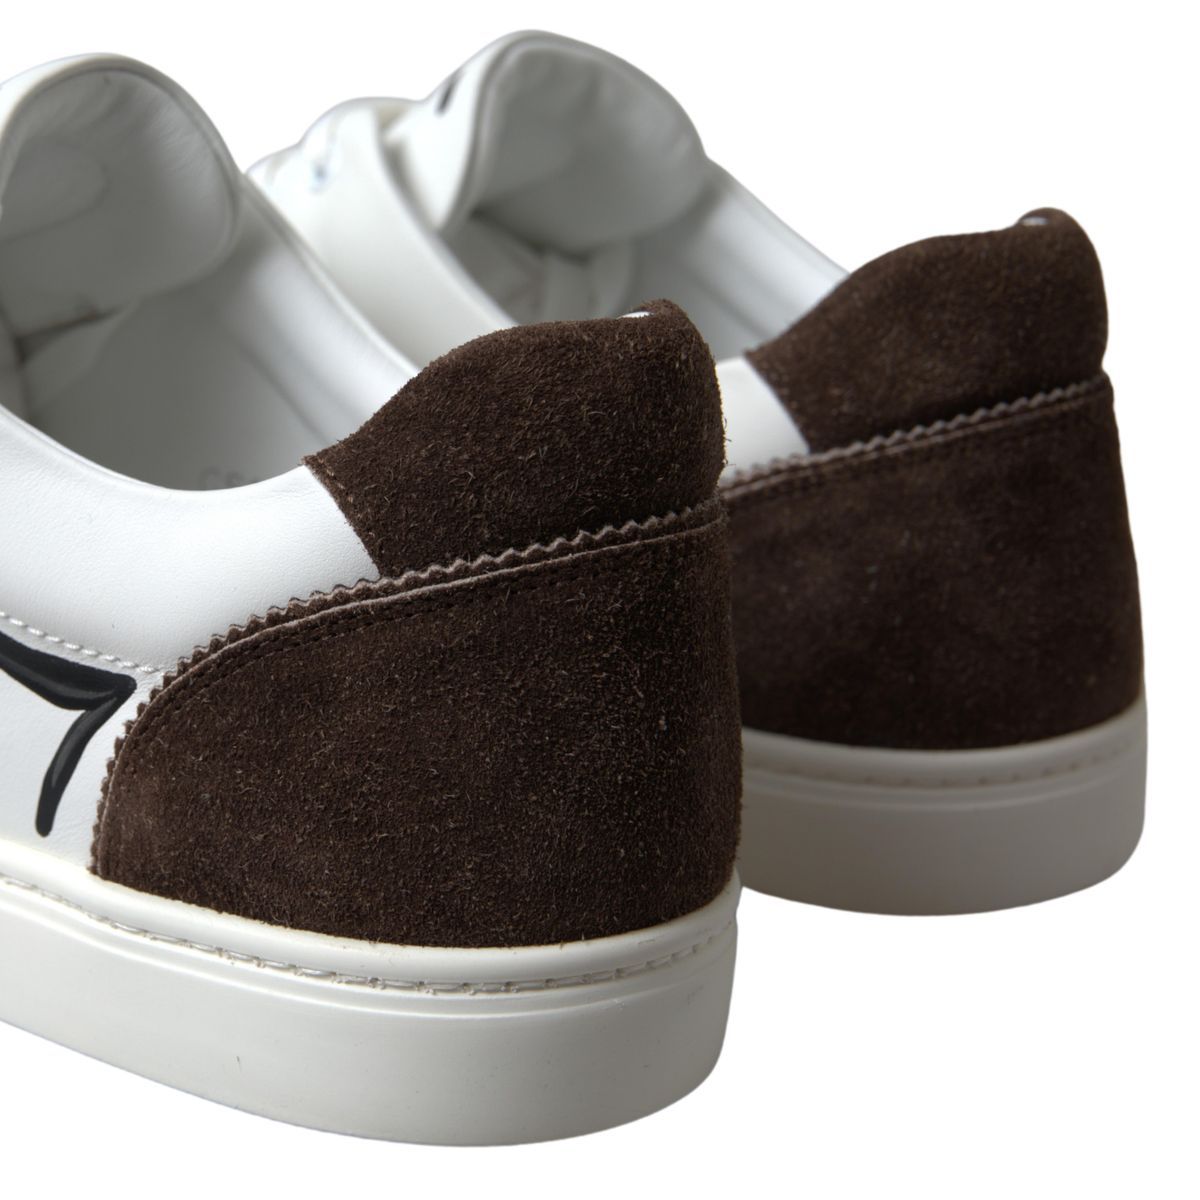 Sleek White Leather Casual Sneakers